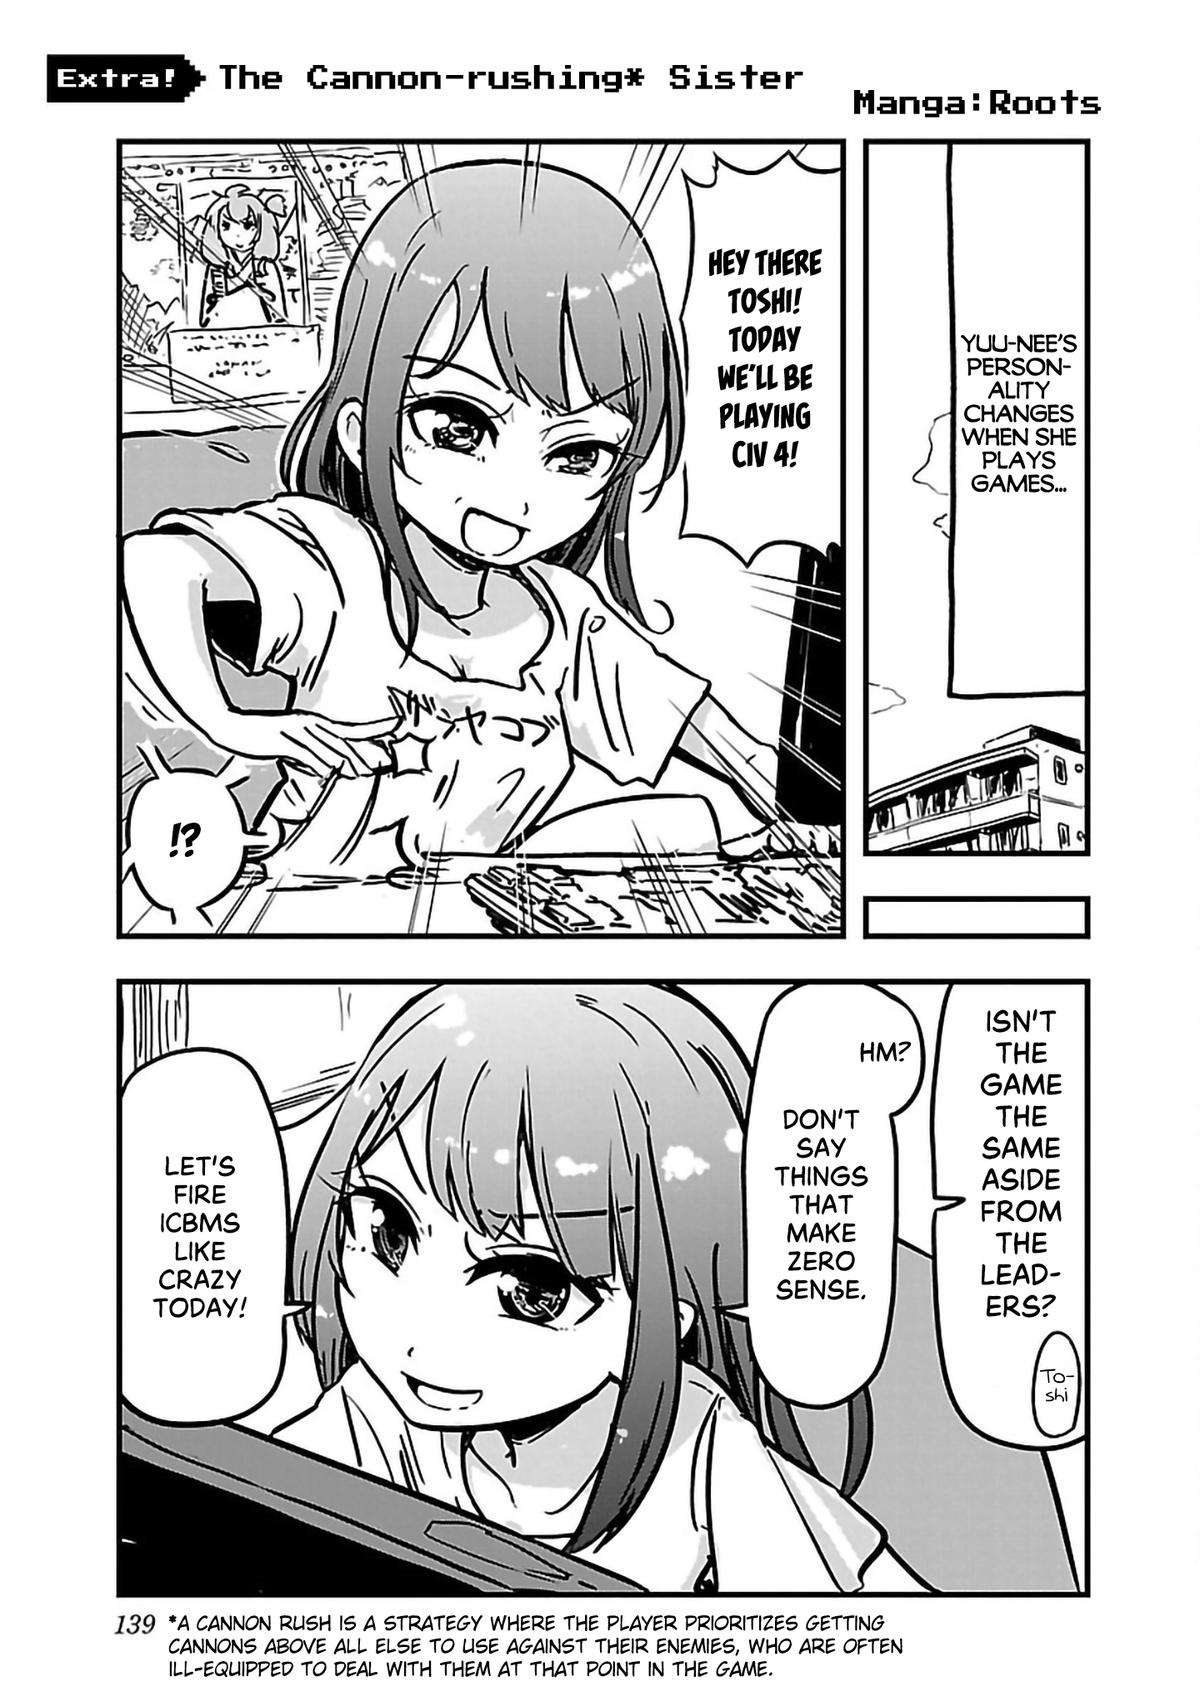 My Onee-chan's Personality Changes When She Plays Games - chapter 13.5 - #1